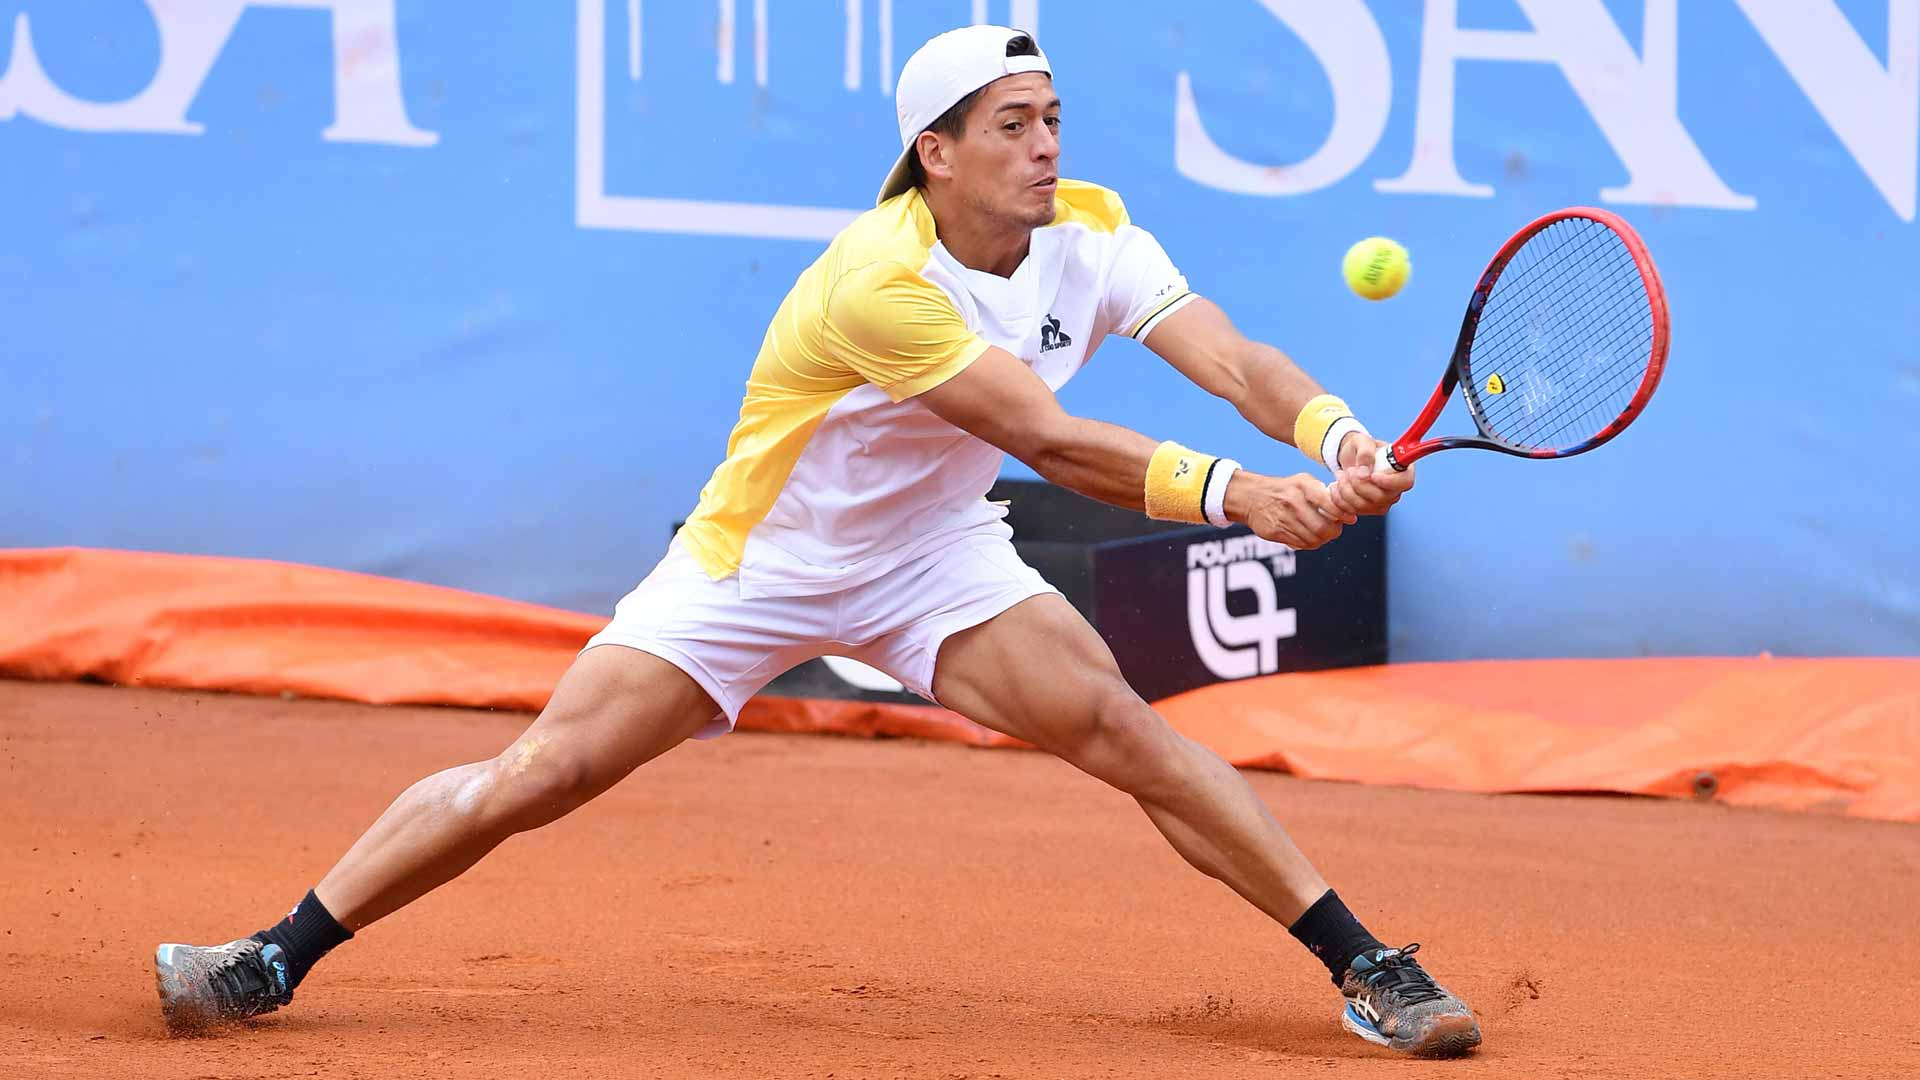 Sebastian Baez goes full stretch for a backhand at the Turin Challenger.